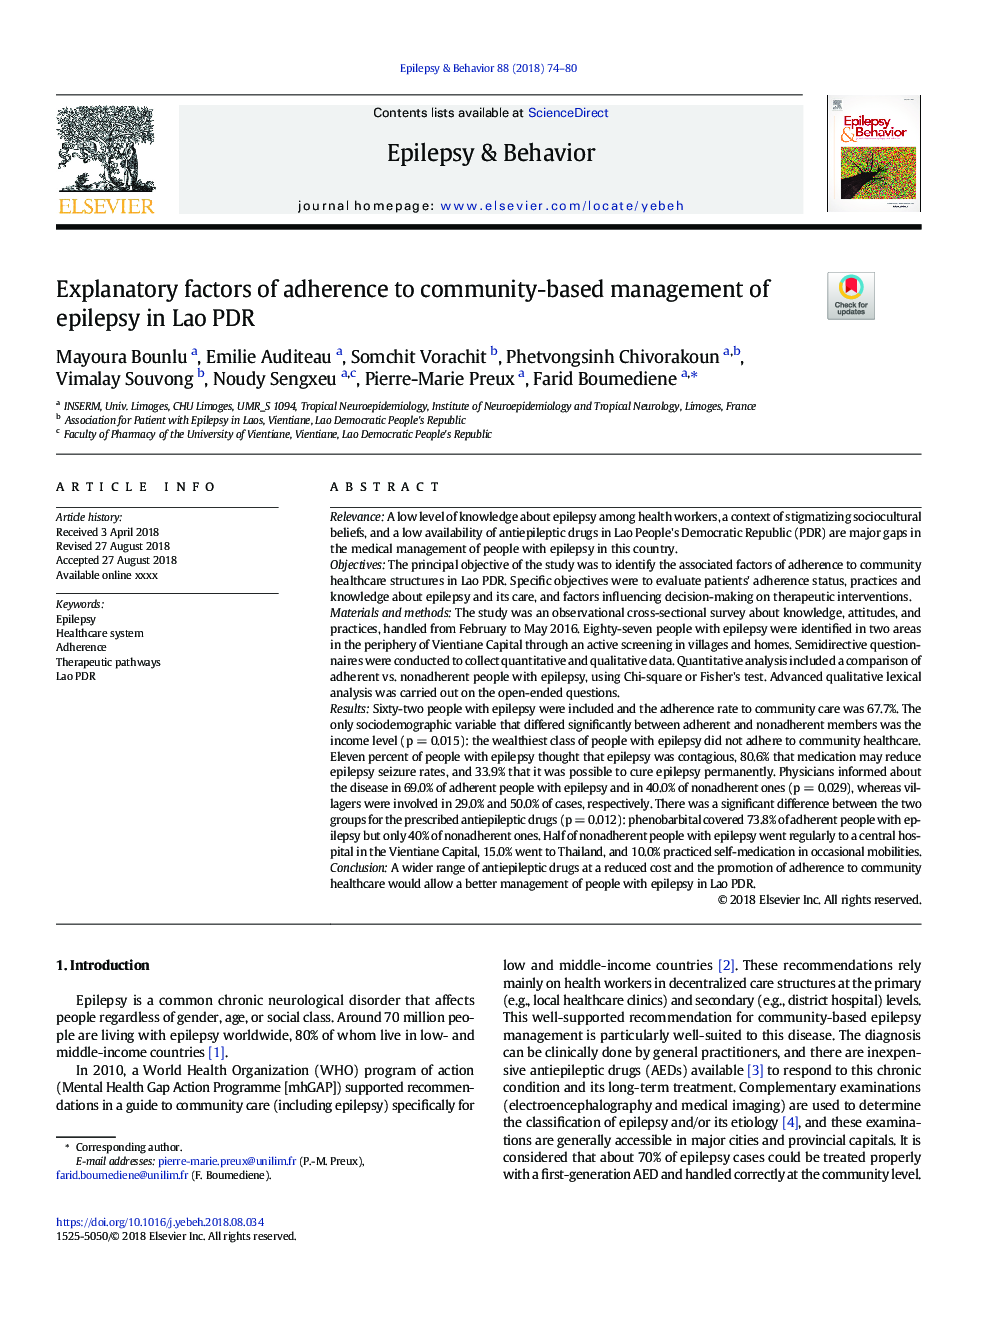 Explanatory factors of adherence to community-based management of epilepsy in Lao PDR